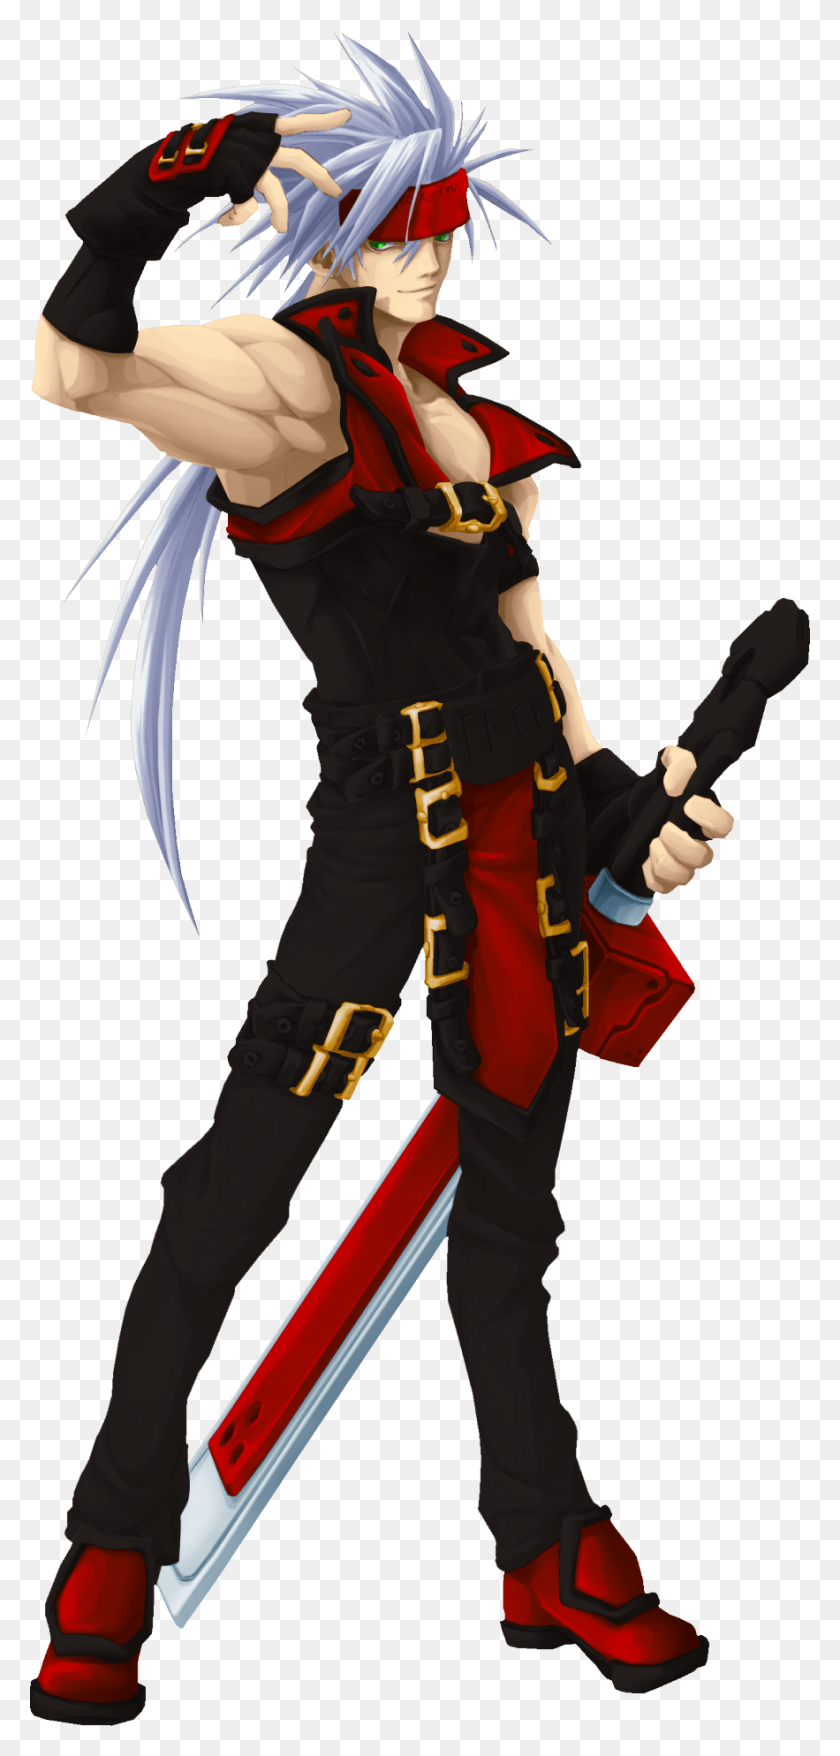 883x1920 Ggxx Sol Badguy Arc System Works Guilty Gear Ragna Guilty Gear Xx Sol Badguy, Ninja, Persona, Humano Hd Png